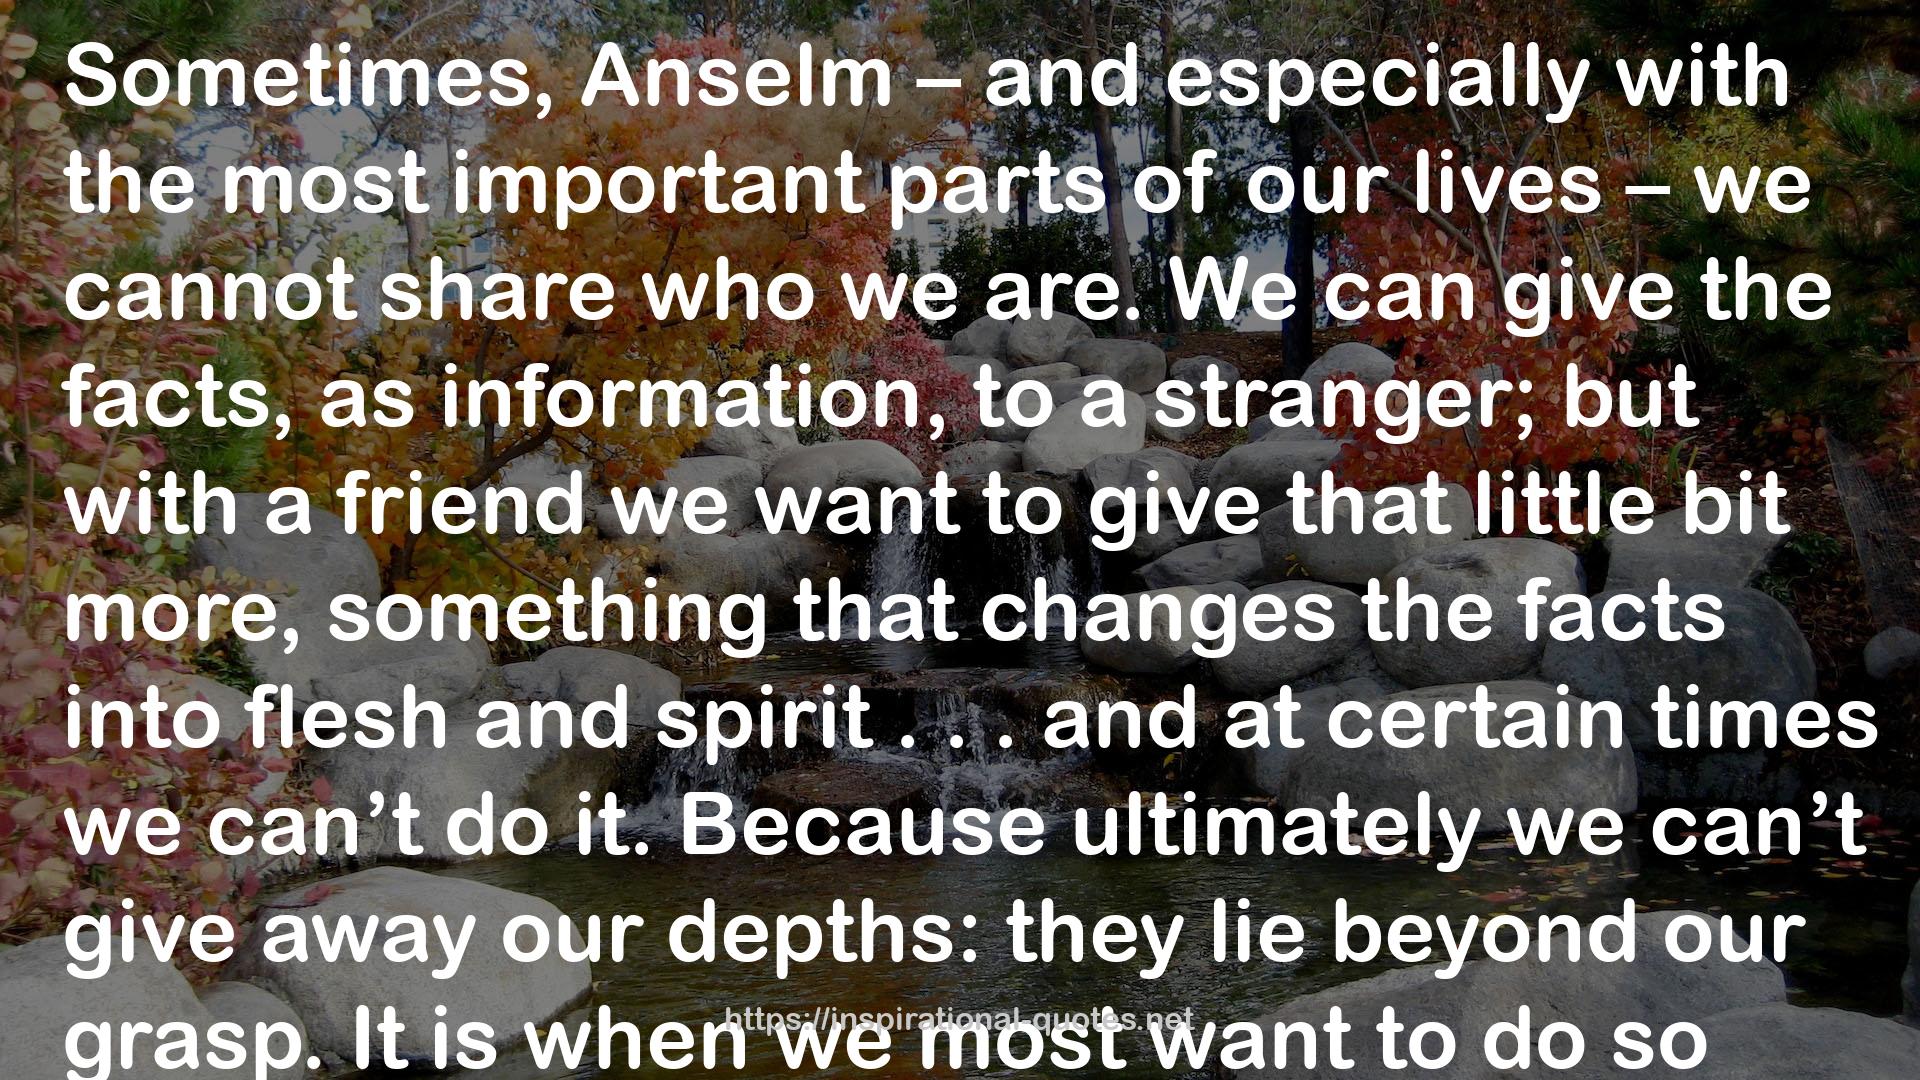 The Day of the Lie (Father Anselm, #4) QUOTES